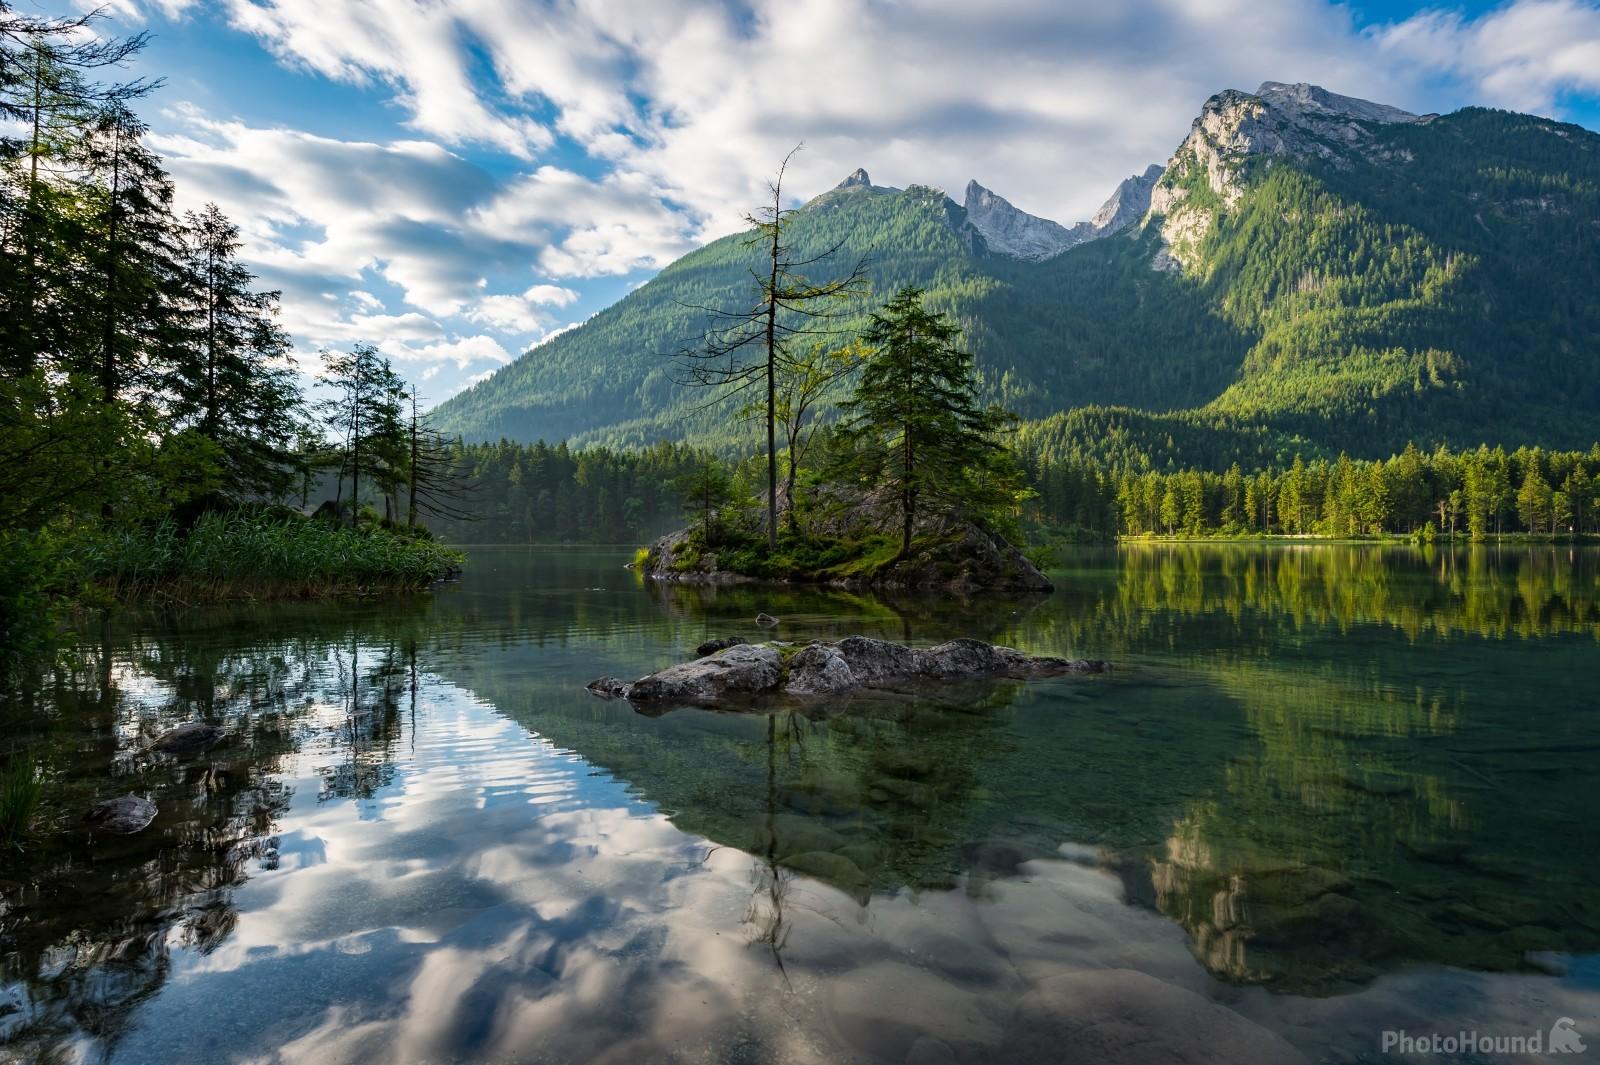 Image of Hintersee by VOJTa Herout